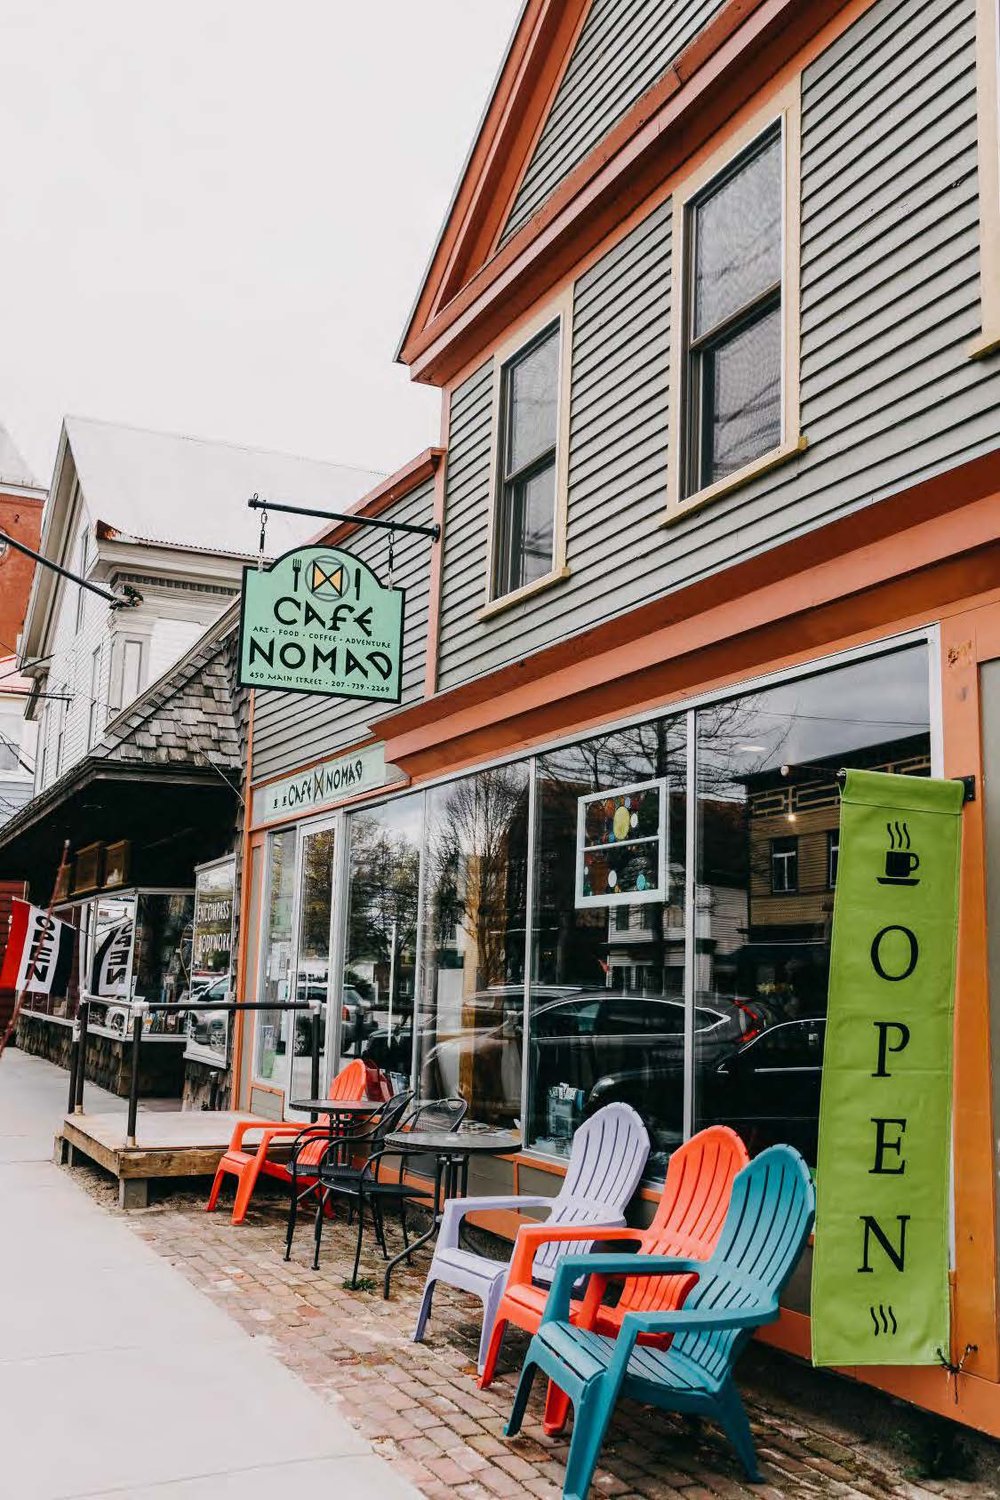 The best restaurants, shopping, hiking, more in Norway, Paris, and Maine | Green & Healthy Maine magazine – Happy, healthy, sustainable